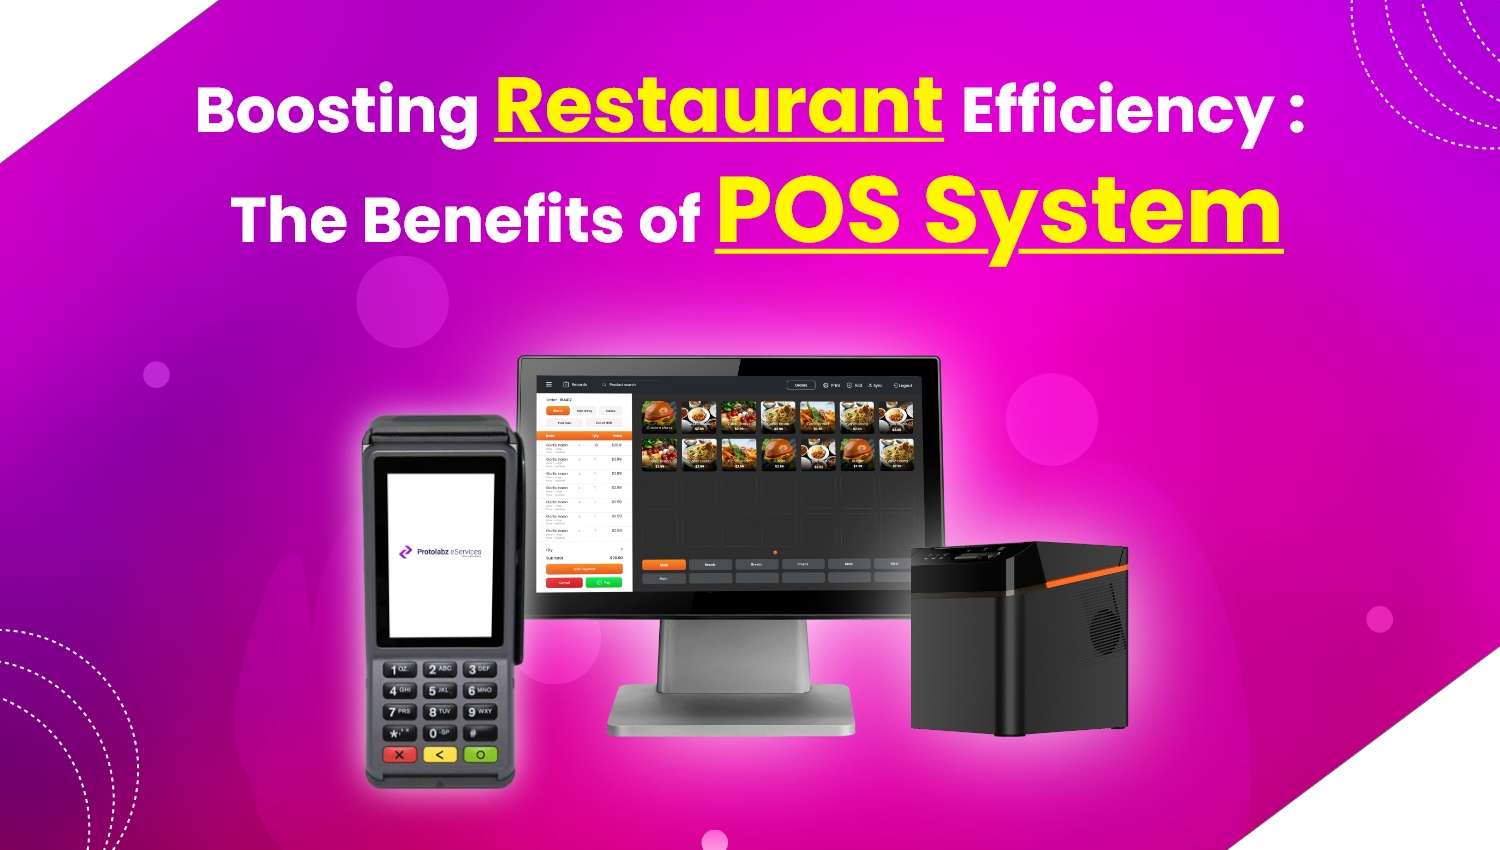 POS system in Restaurants and its Benefits